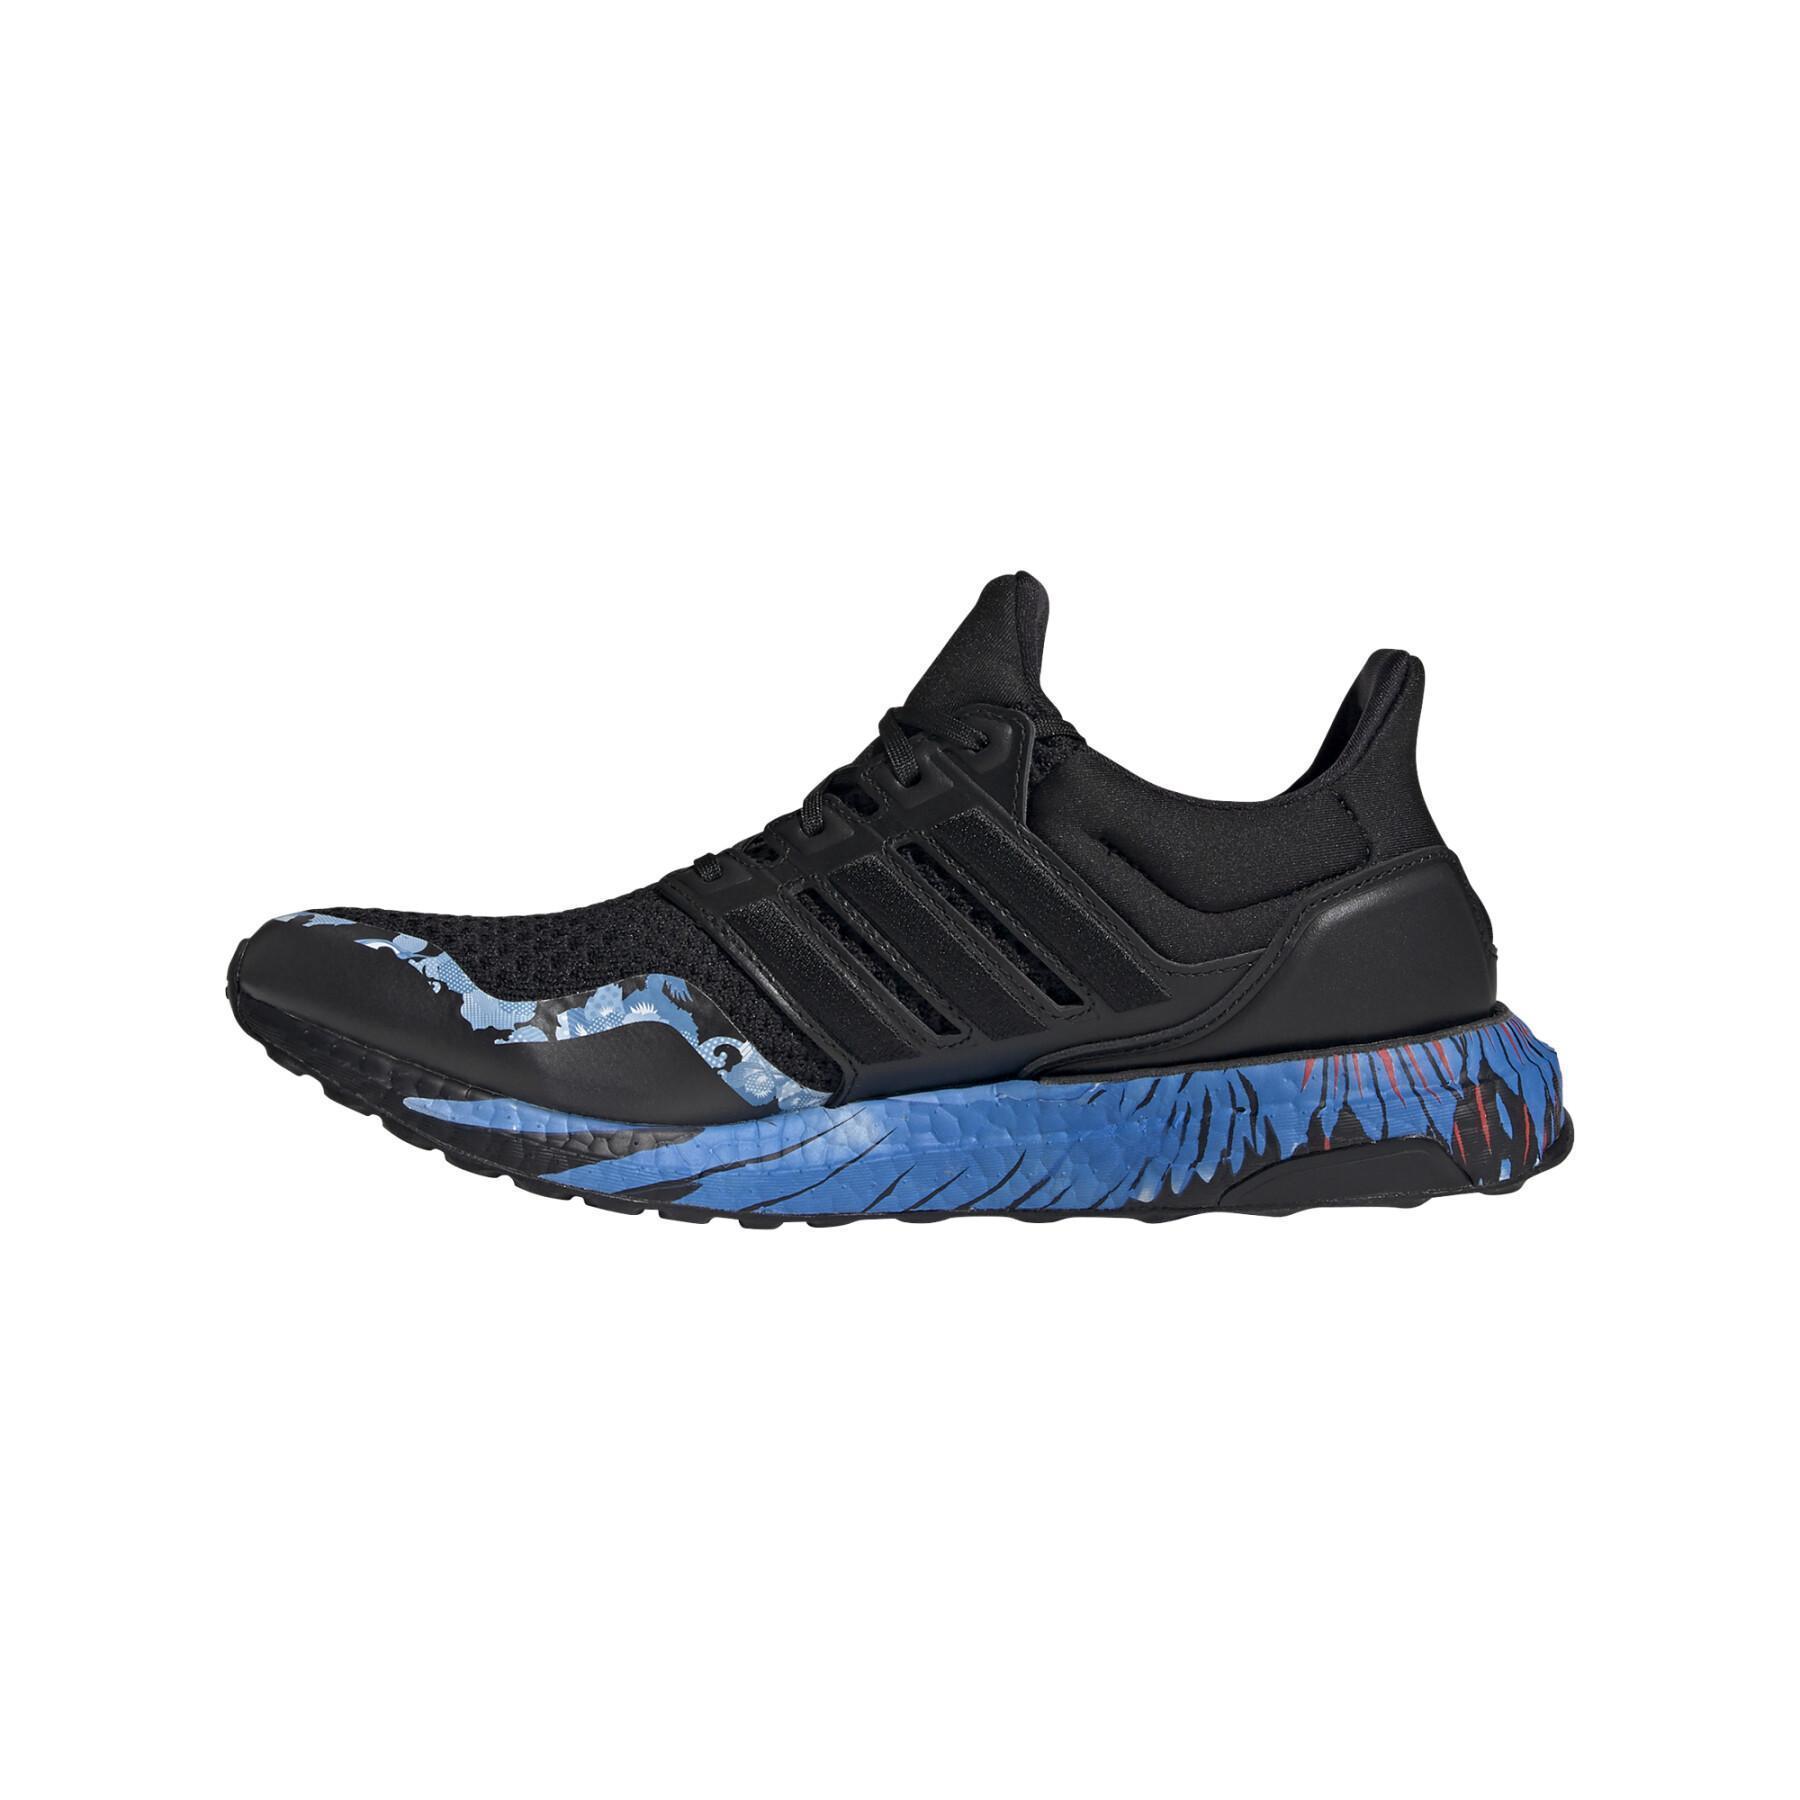 Formadores adidas Ultraboost DNA